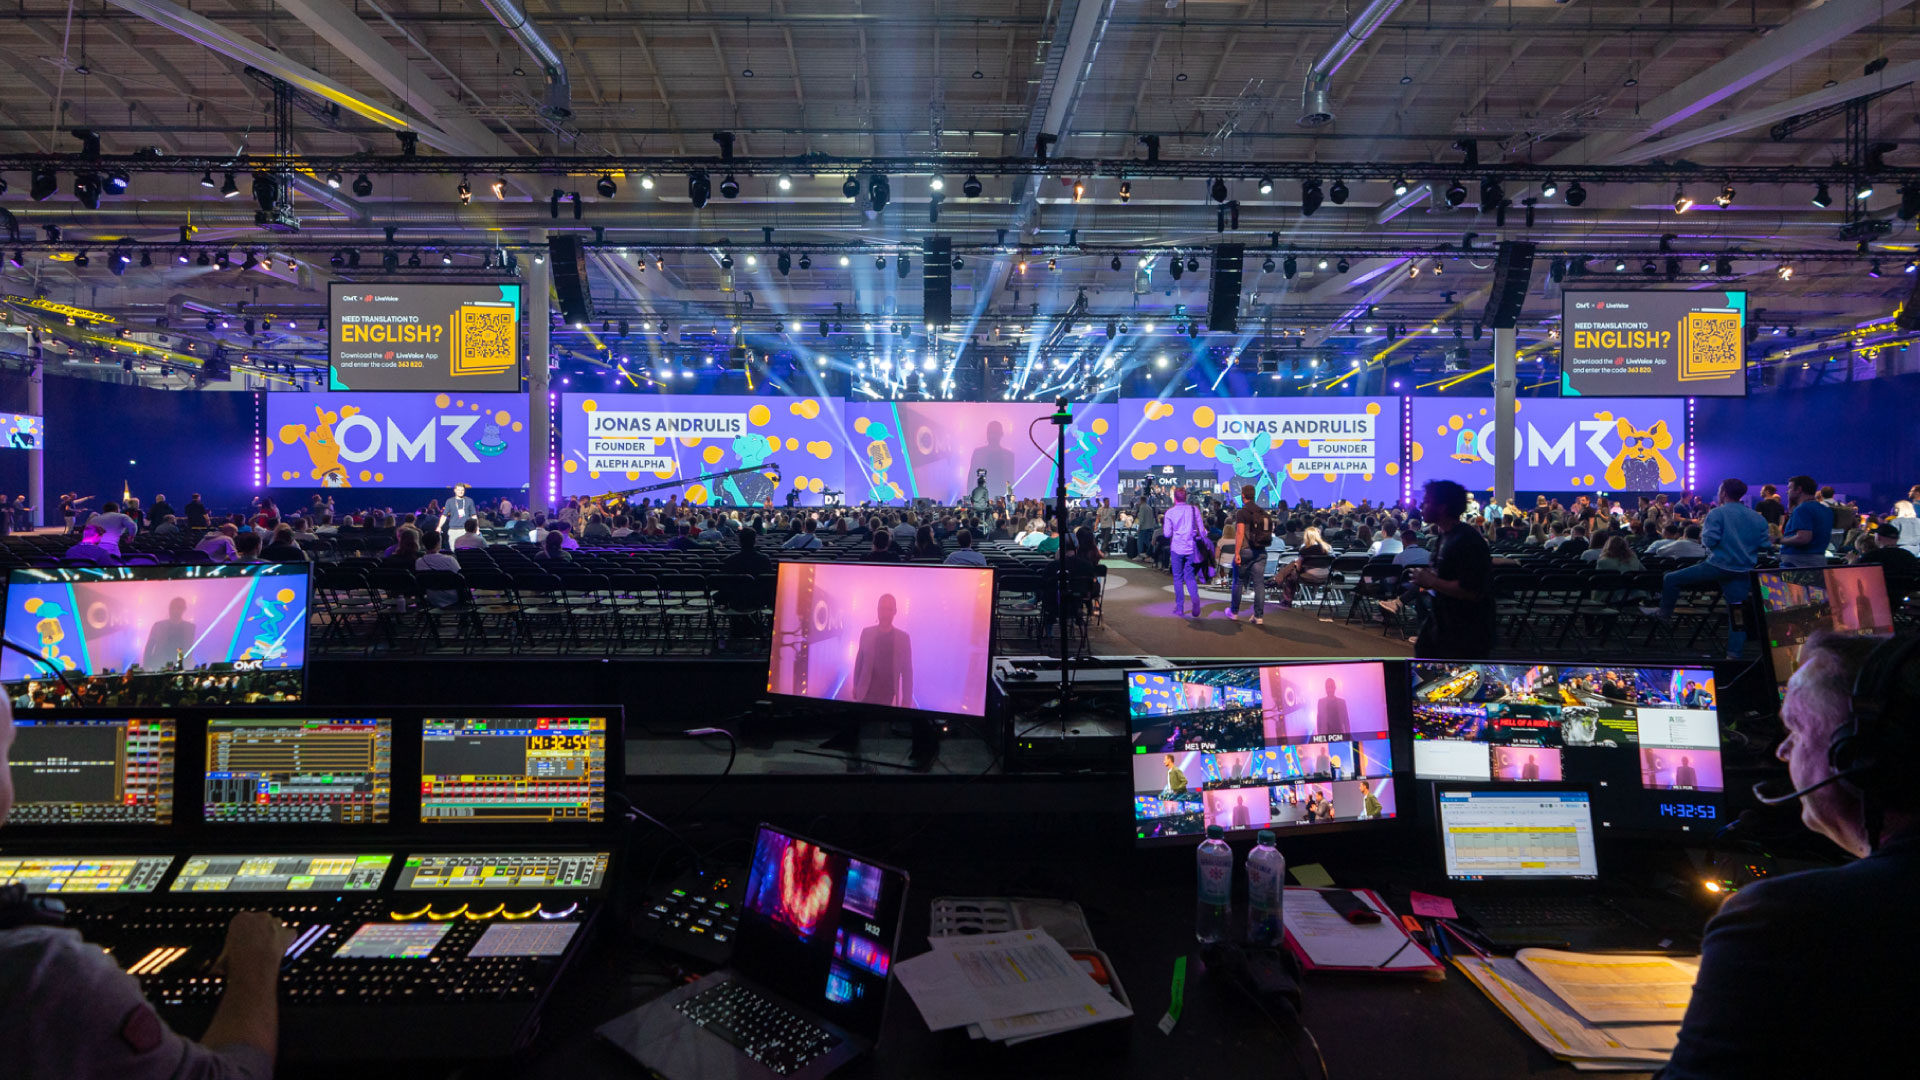 PRG as event technology service provider with first-class video technology at OMR. Interested? Feel free to contact our video experts!